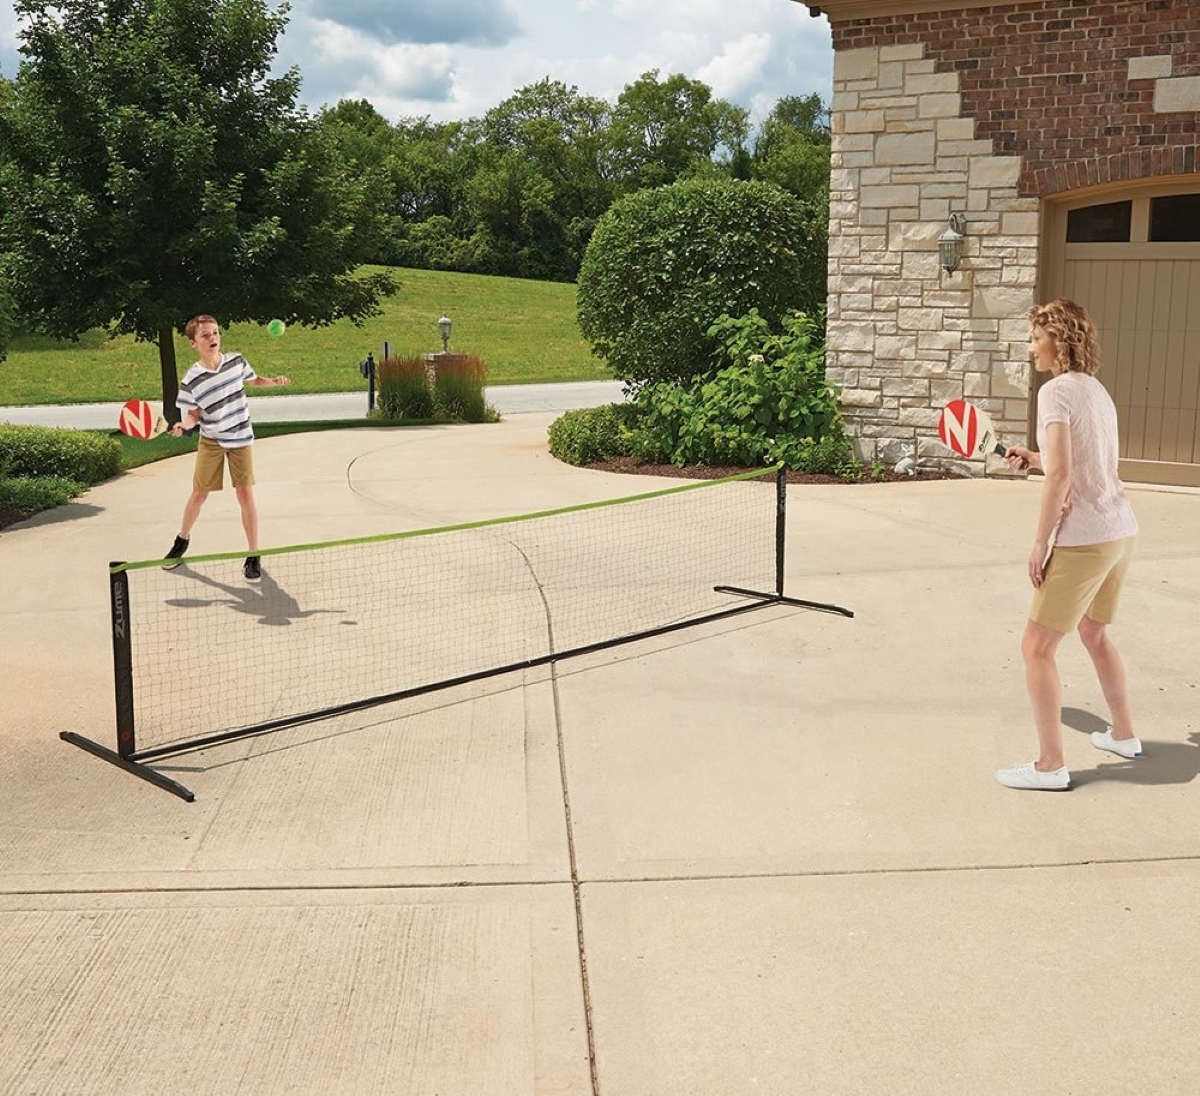 Two people are playing pickleball over a net in their driveway.